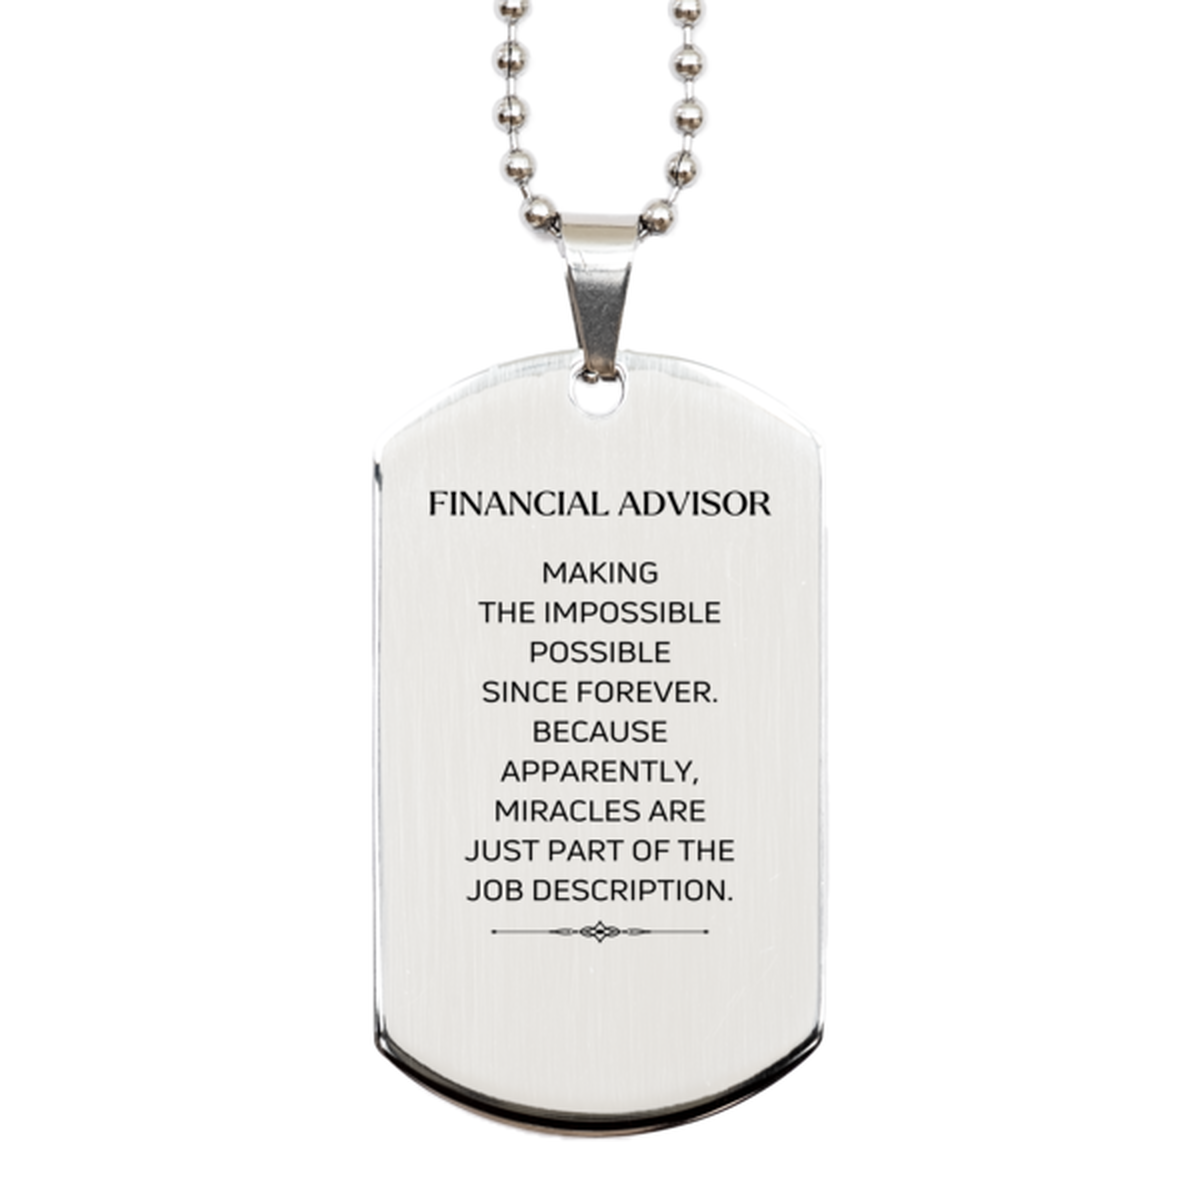 Funny Financial Advisor Gifts, Miracles are just part of the job description, Inspirational Birthday Silver Dog Tag For Financial Advisor, Men, Women, Coworkers, Friends, Boss